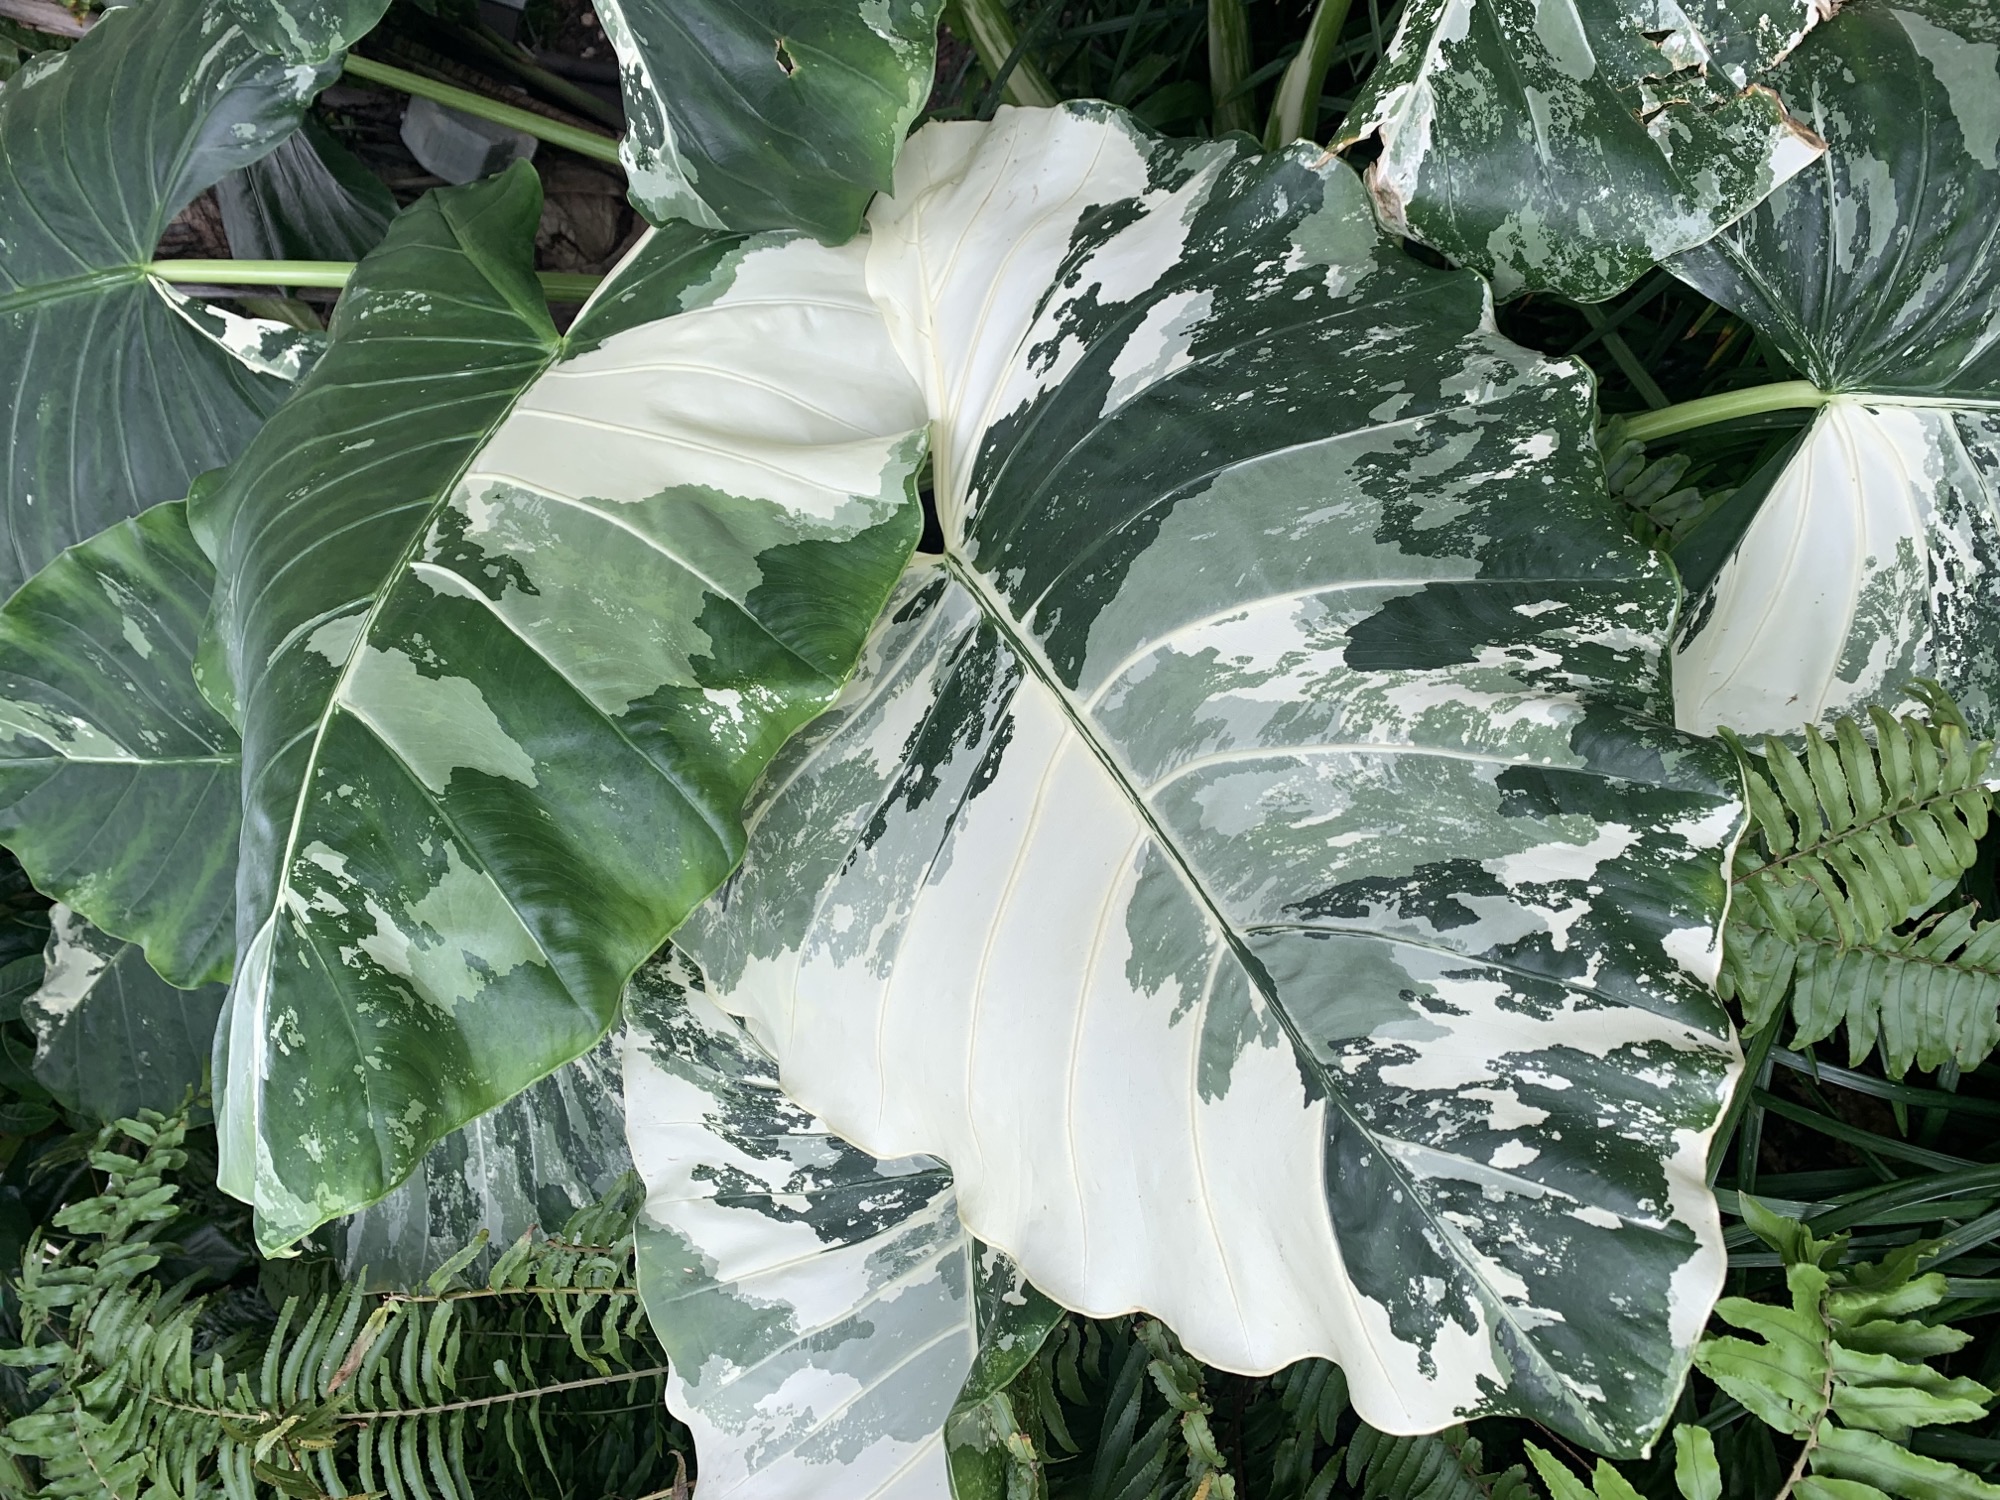 Green plant with large leaves